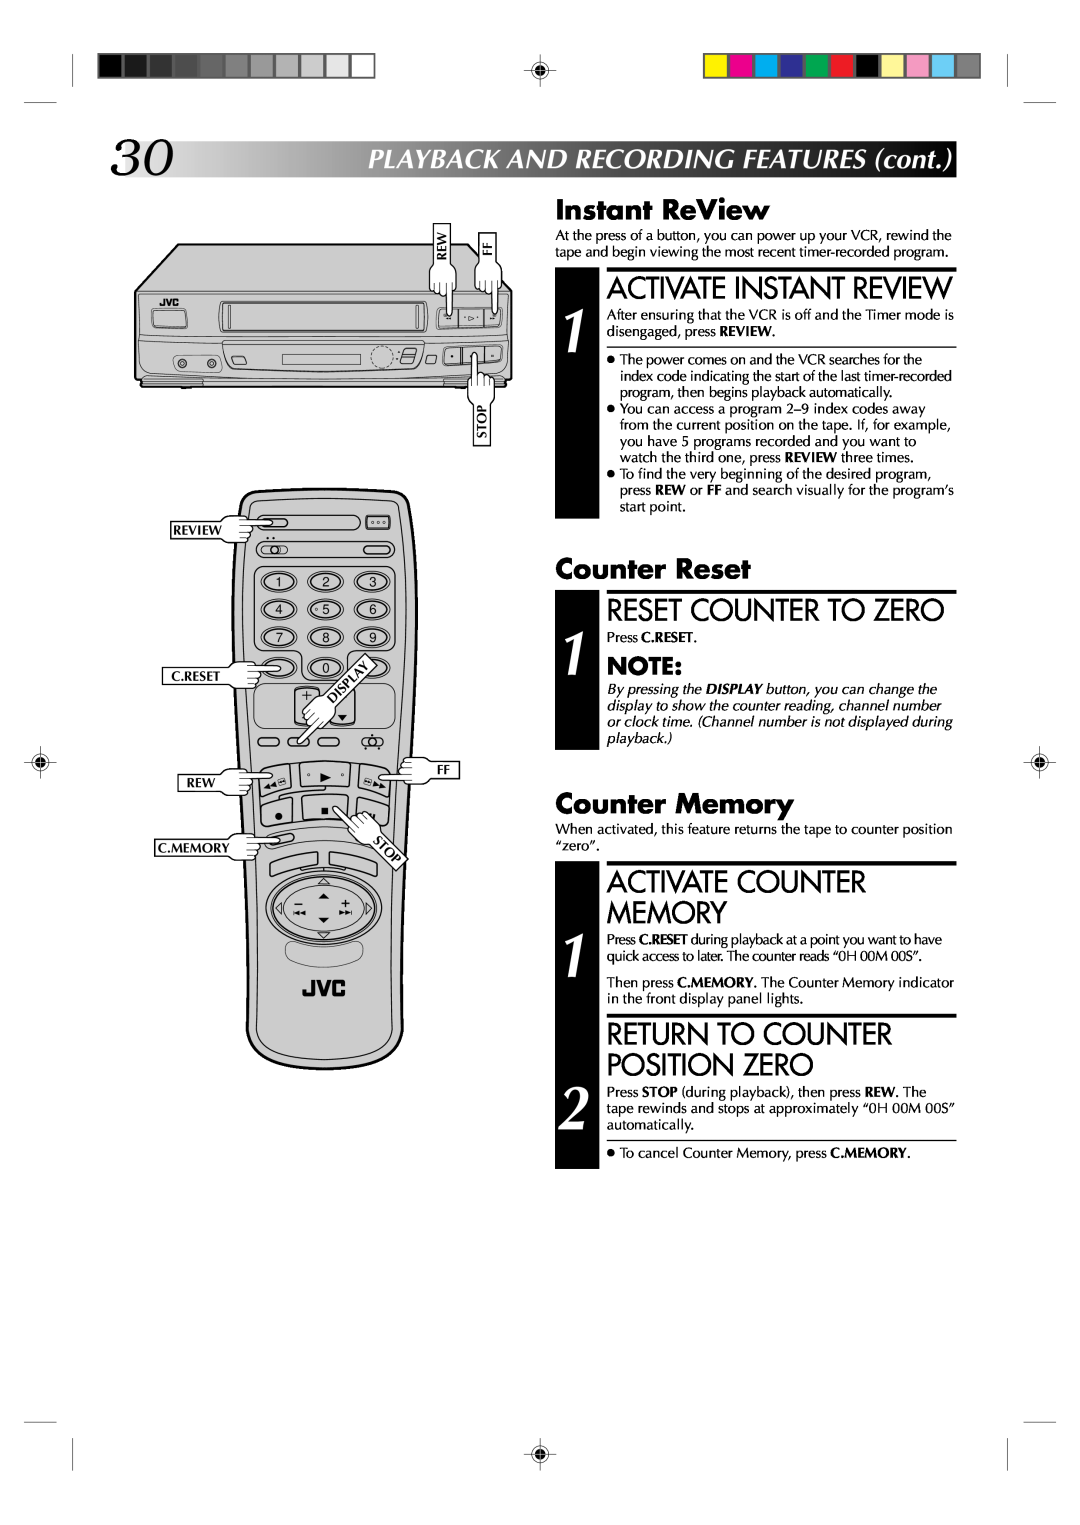 JVC HR-VP434U Activate Instant Review, Reset Counter To Zero, Activate Counter, Memory, Return To Counter Position Zero 